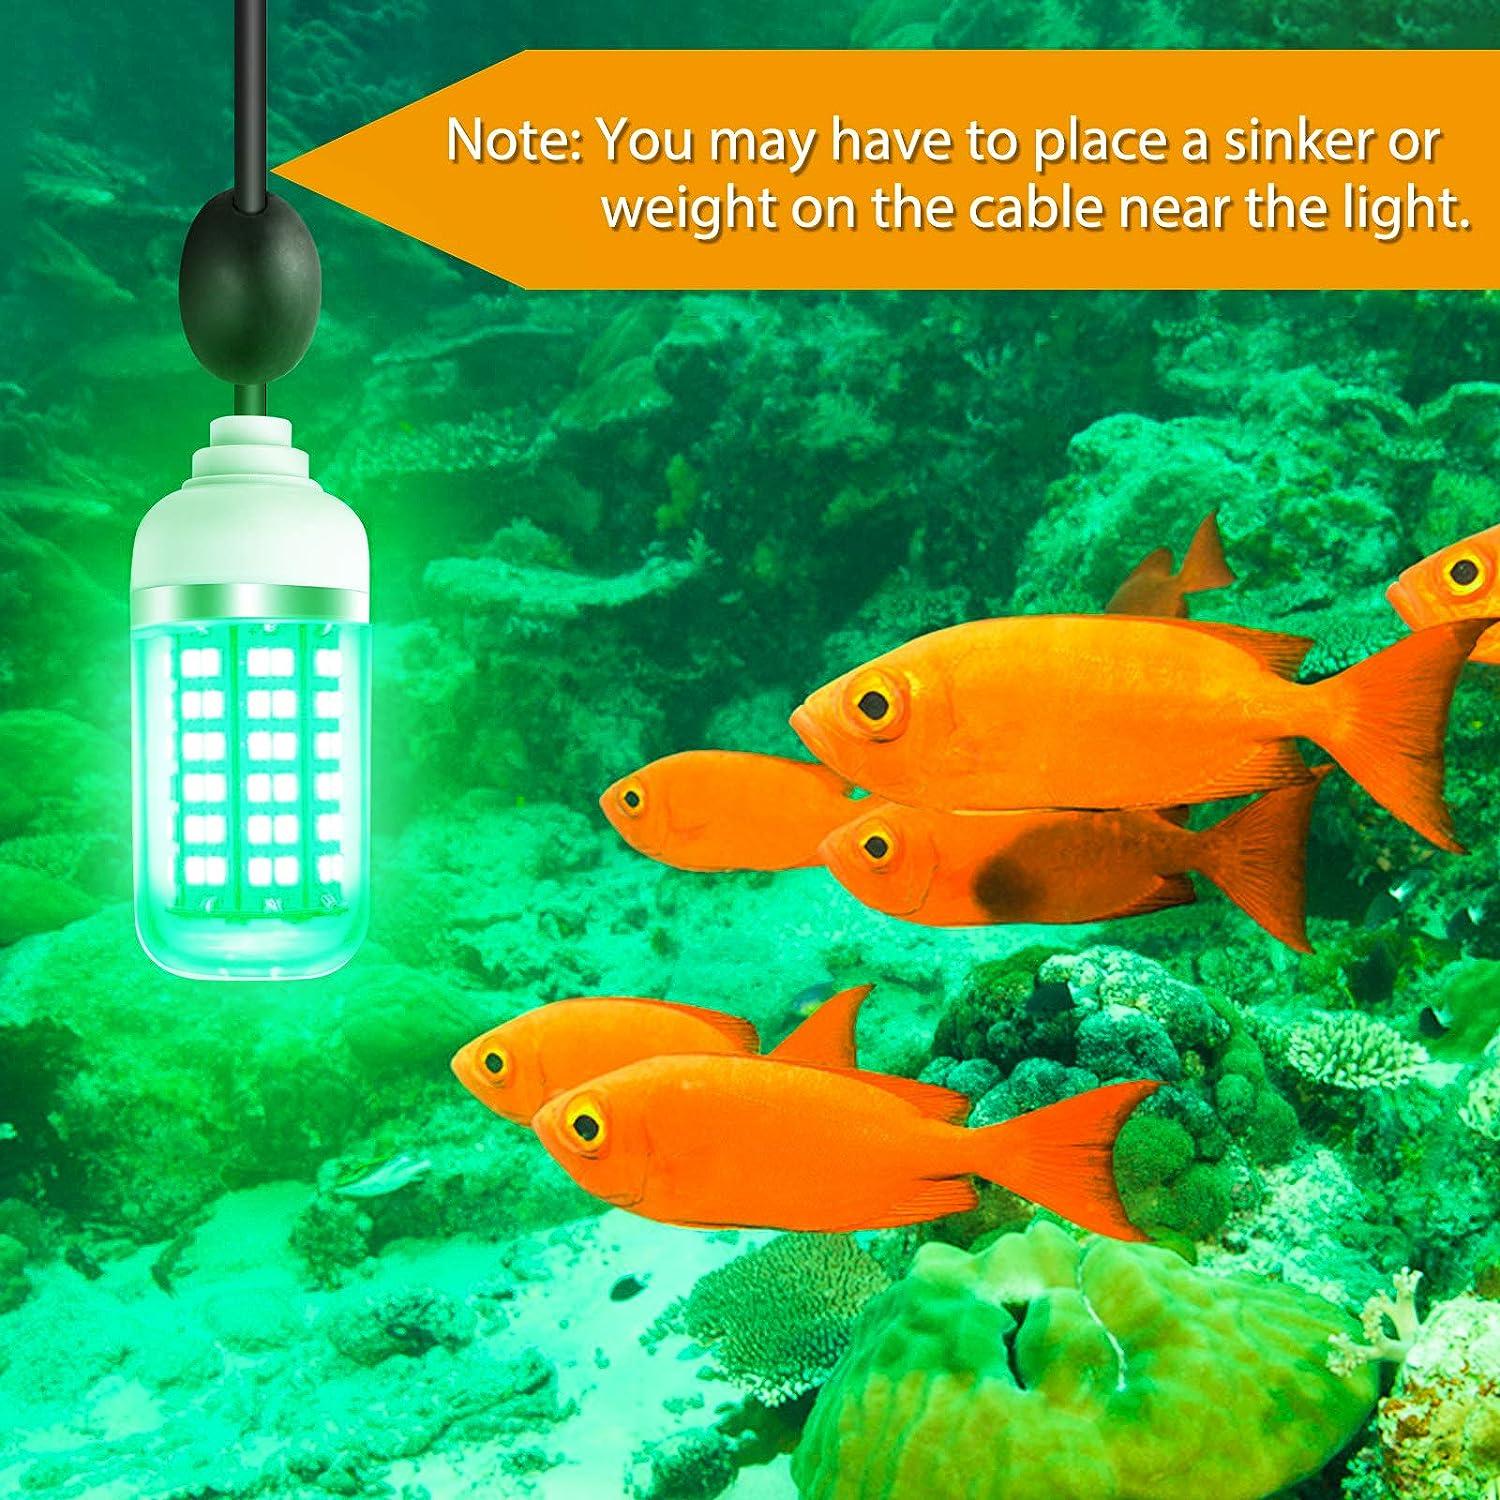 Fishing Light LED Submersible Underwater Fish Finder Lamp with 16.5 ft  Cord, Crappie, Snook, Fish Attractor 